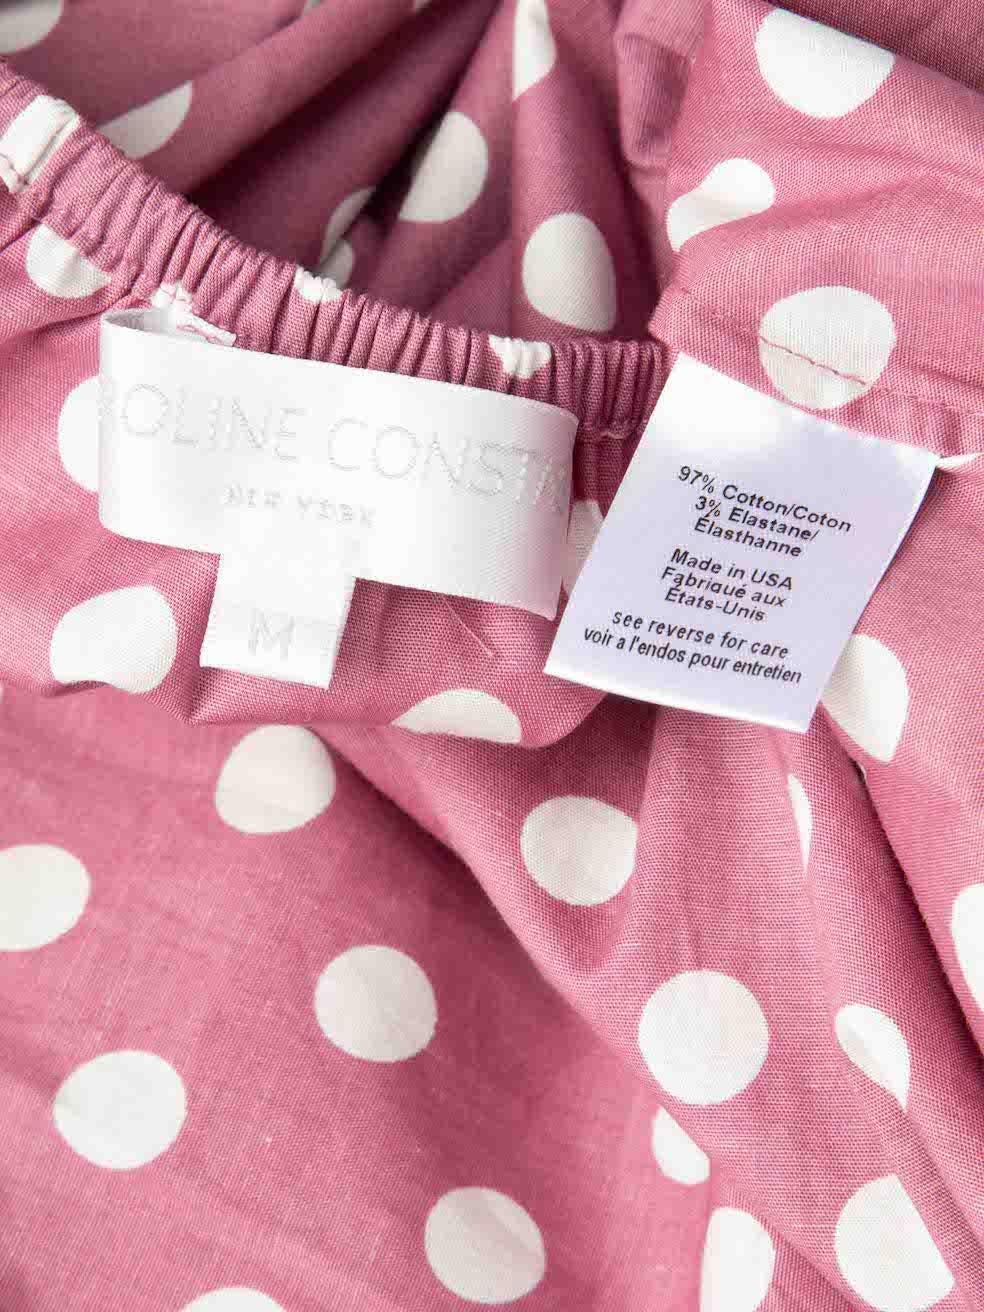 Caroline Constas Mauve Polkadot Puff Sleeve Dress Size M In Excellent Condition For Sale In London, GB